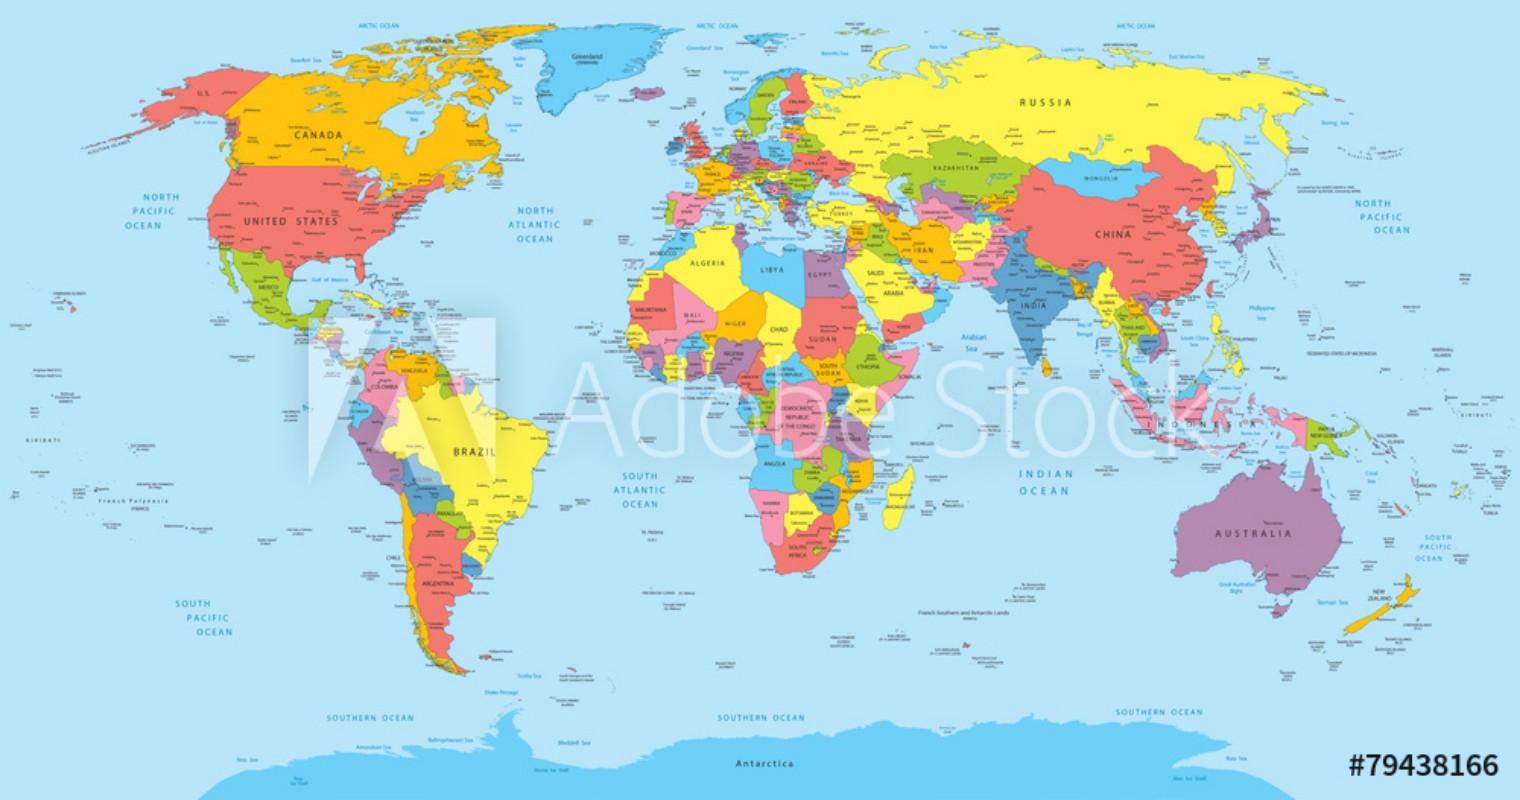 Image de World map with countries country and city names